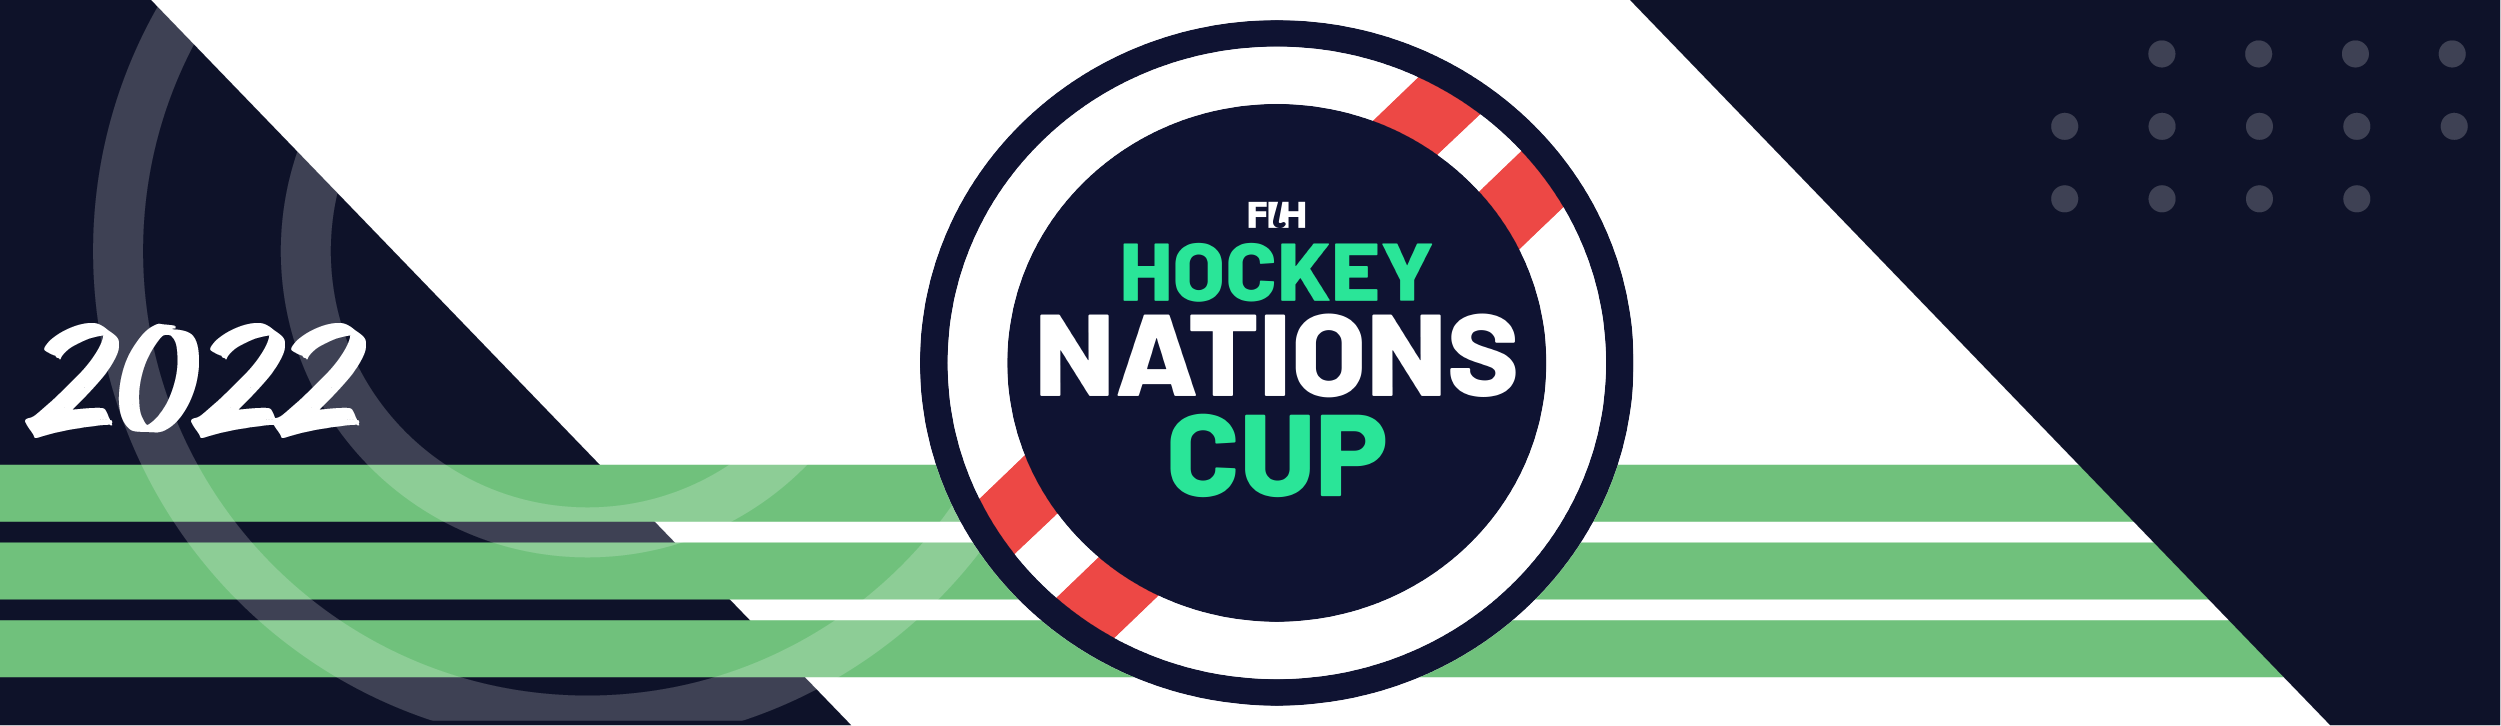 Hockey Nations Cup